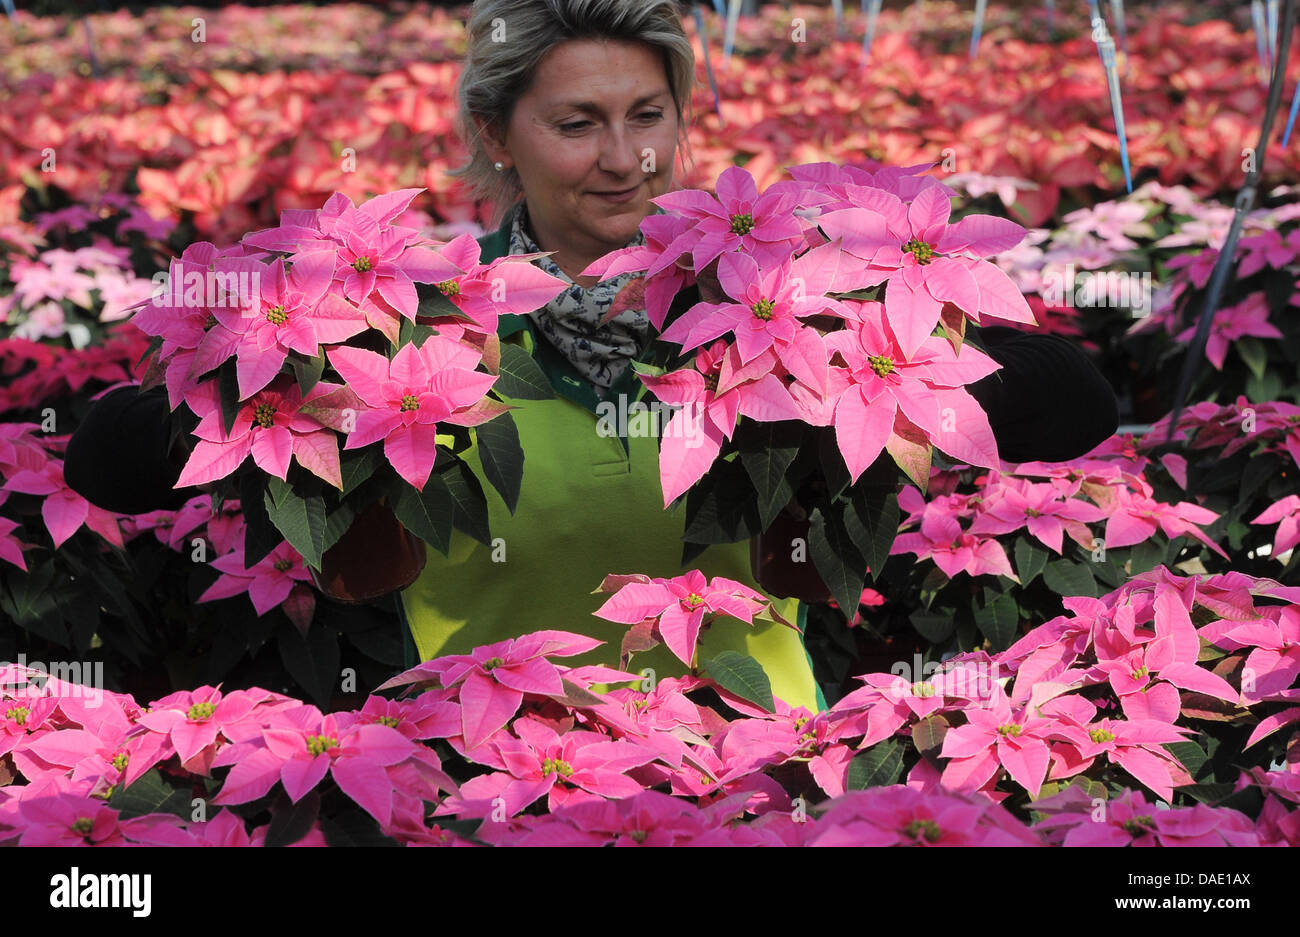 Gardner Michaela Gruenberg examines new pink poisettias in Langerwisch, Germany, 07 November 2011. 150,000 plants in more than 20 varieties are waiting for buyers. The flowers, which bloom between November and February, are a well loved room decoration furing the Advent and Christmas time. Photo: Bernd Settnik Stock Photo